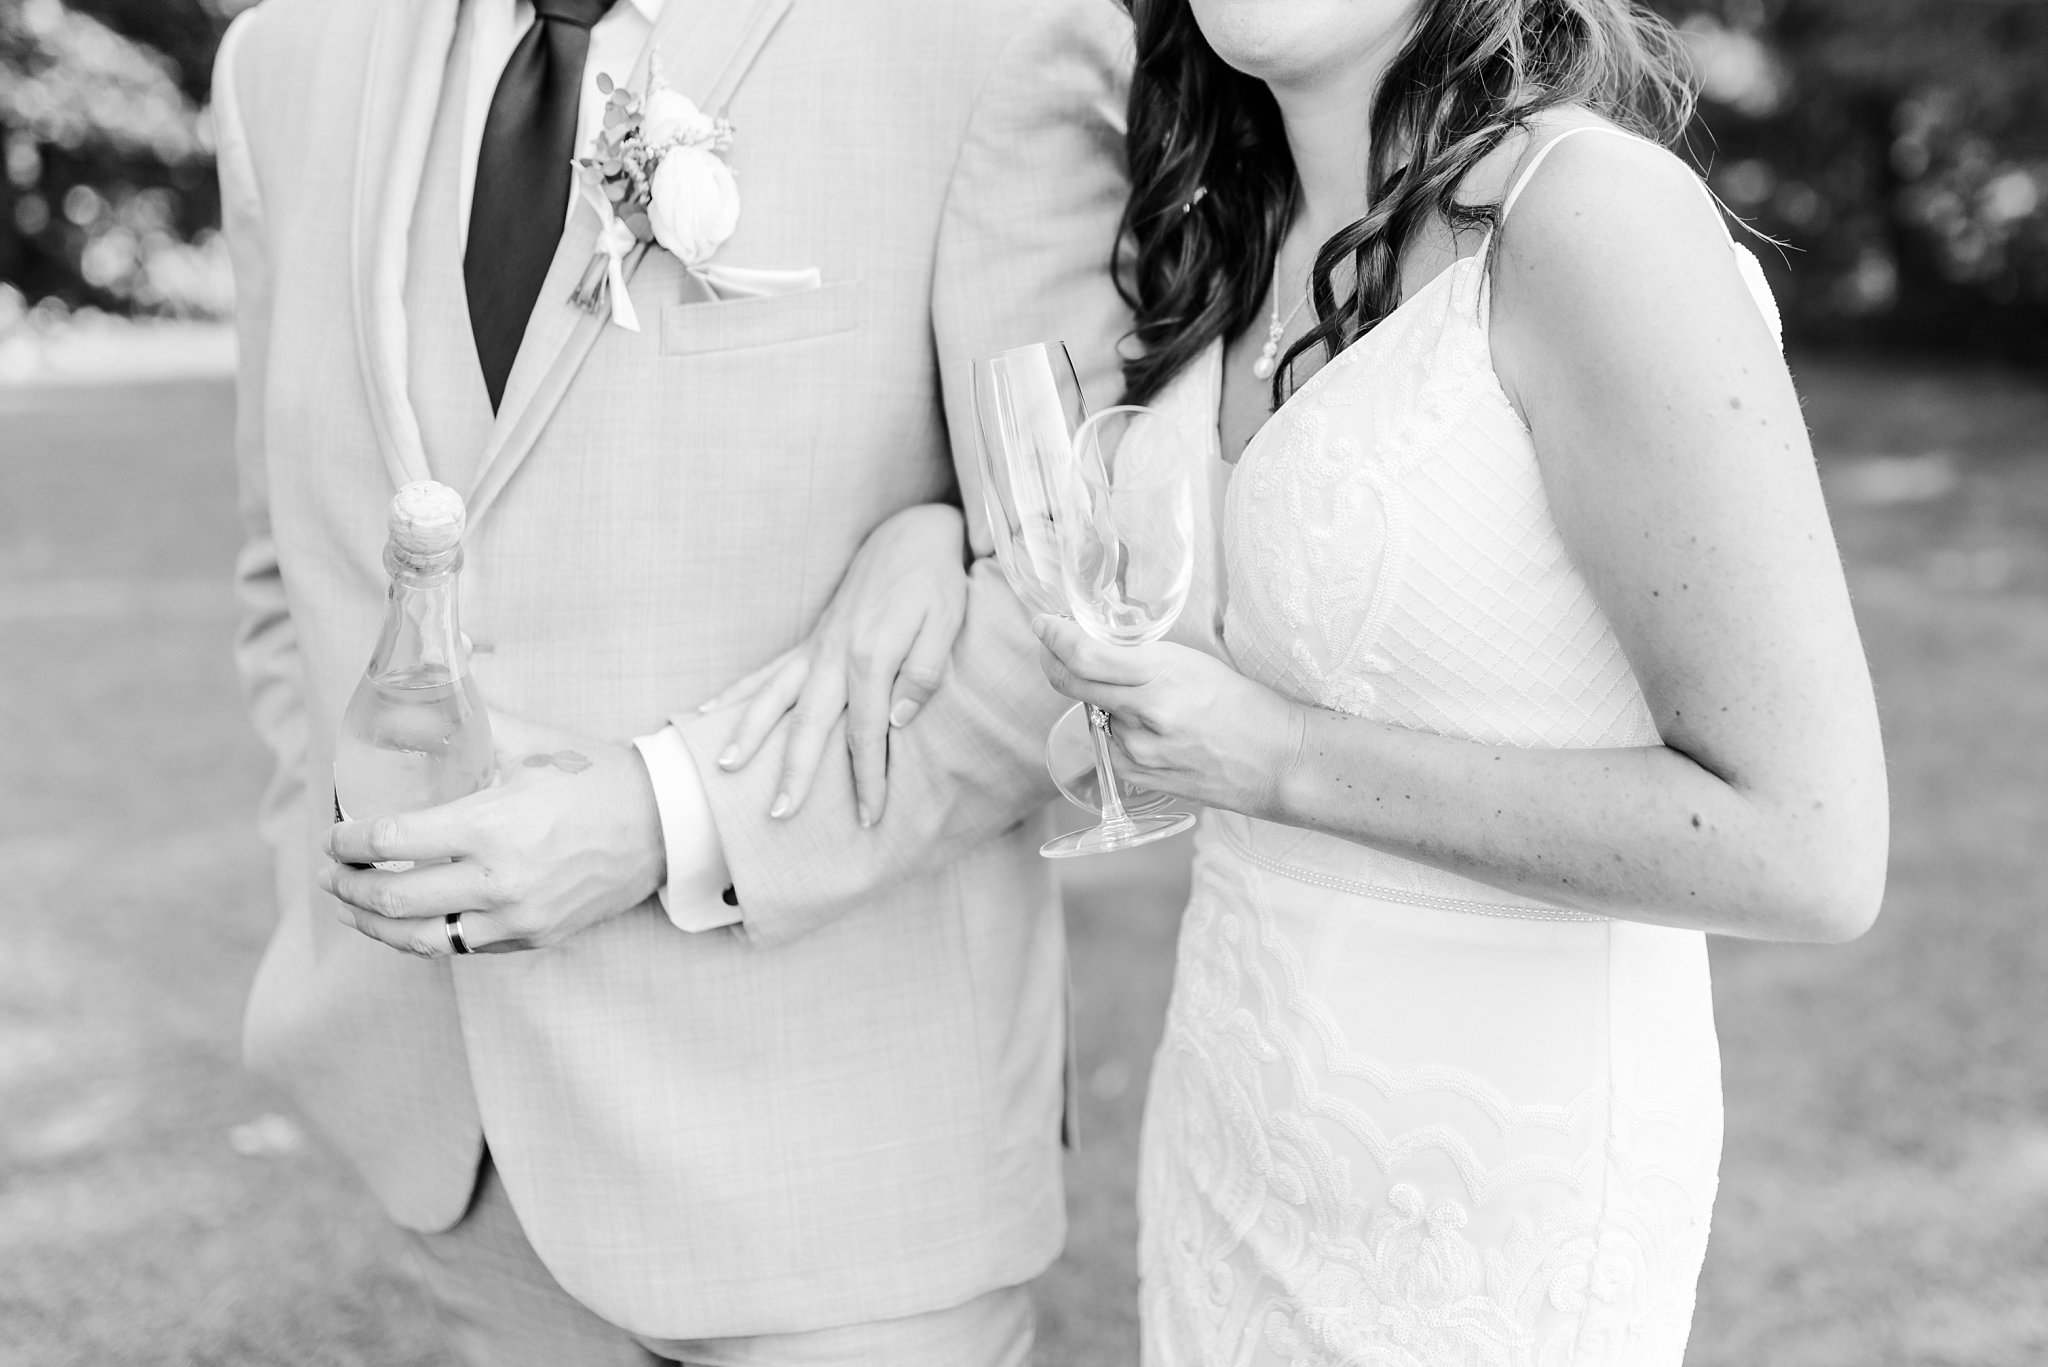 a black and white close up photo of a bride and groom. the groom is holding a bottle of champagne and the bride is holding two champagne flutes